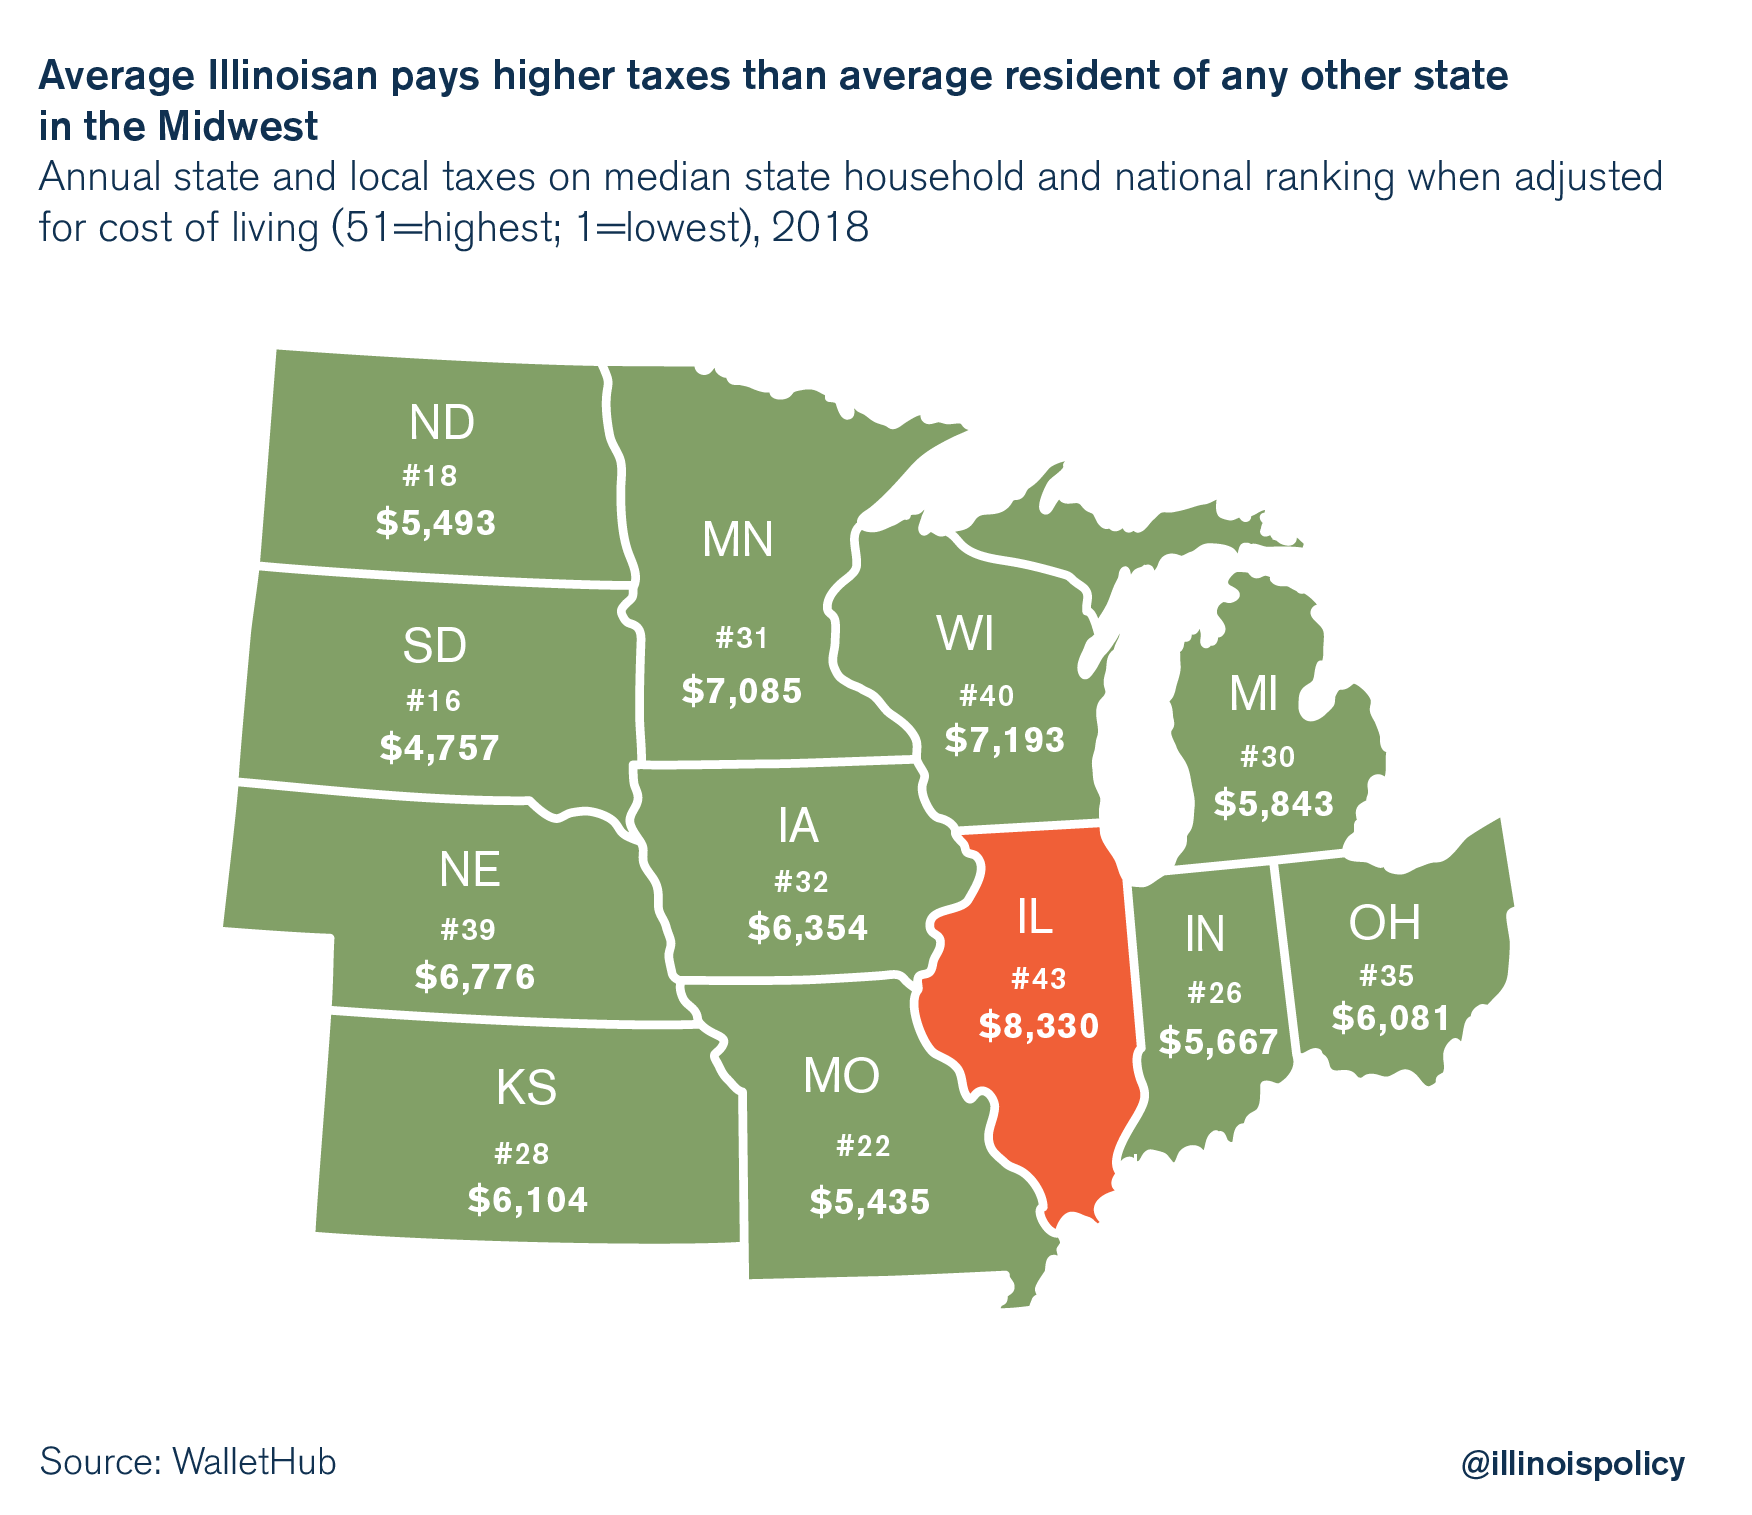 Average Illinoisan pays higher taxes than average resident of any other state in the Midwest